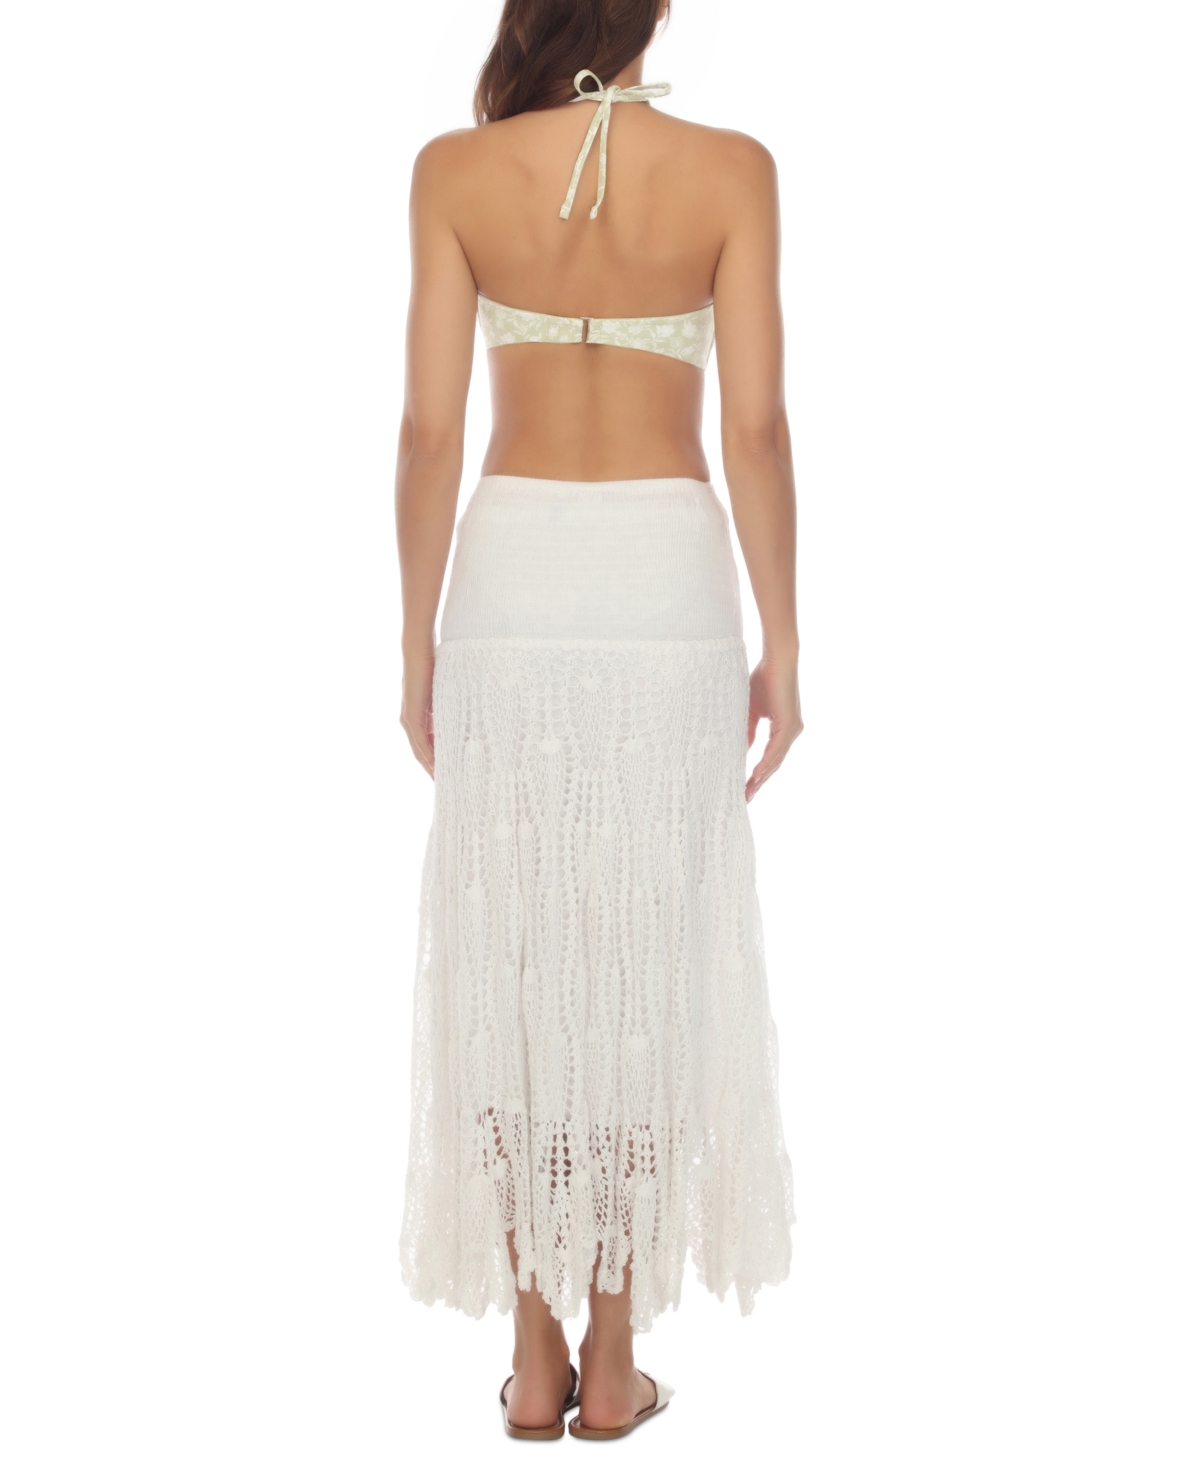 Shop Raviya Women's Crochet Convertible Cover-up In White